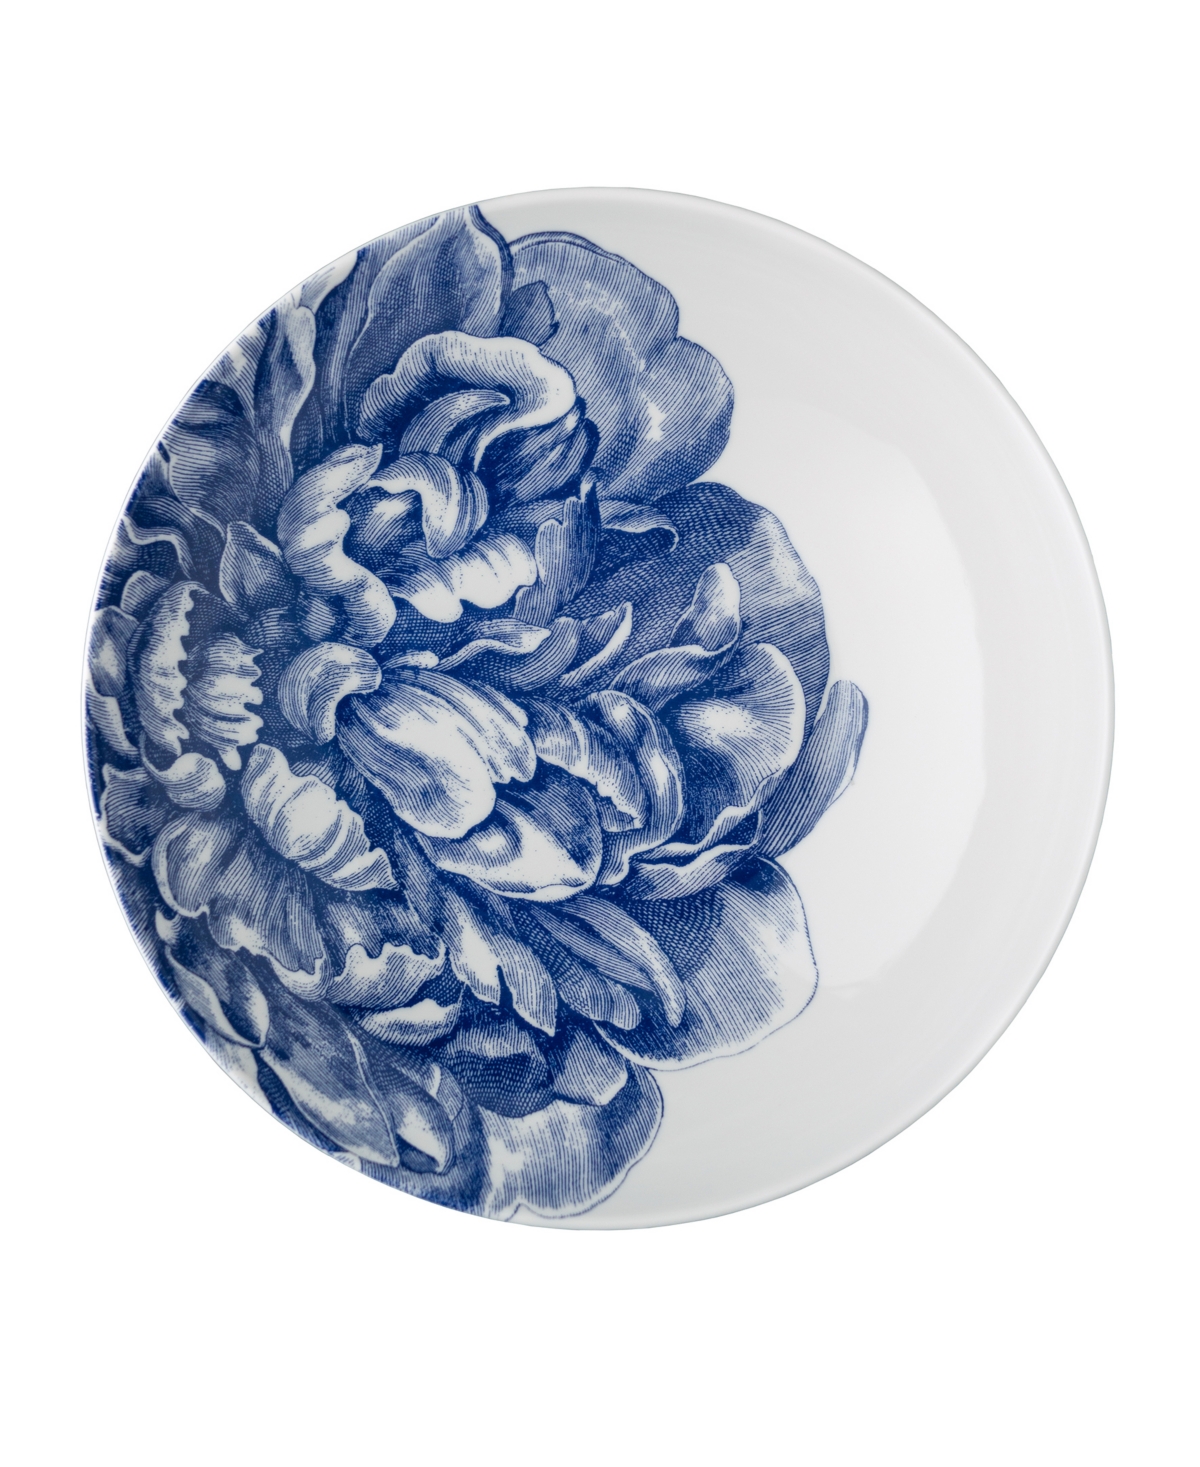 Caskata Peony Wide Serving Bowl In Blue On White